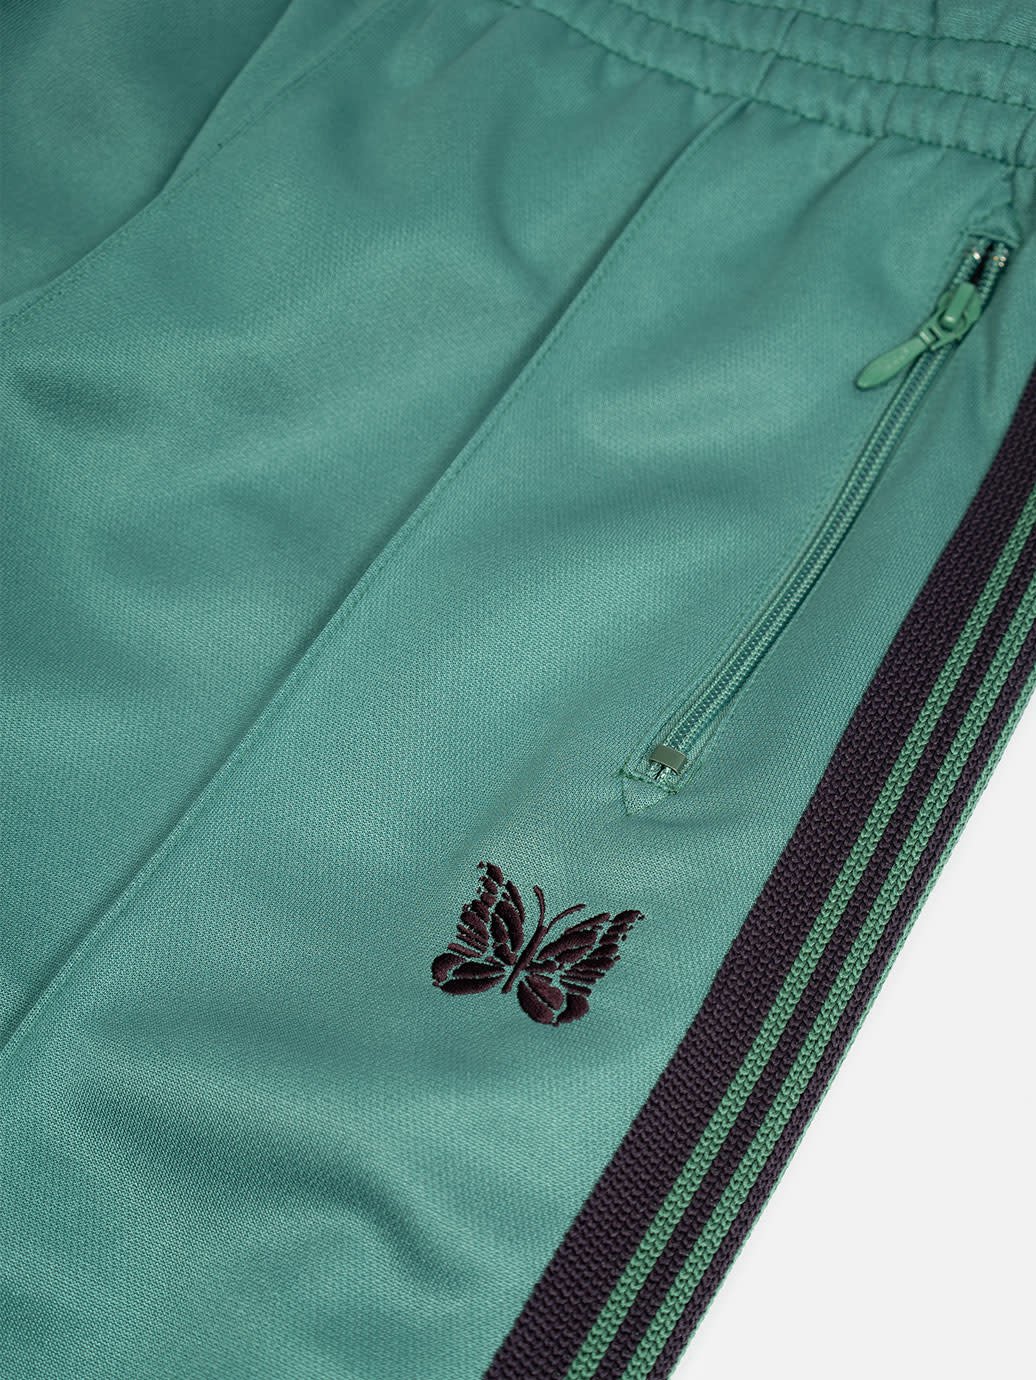 Poly Smooth Track Pants Emerald Green by Needles